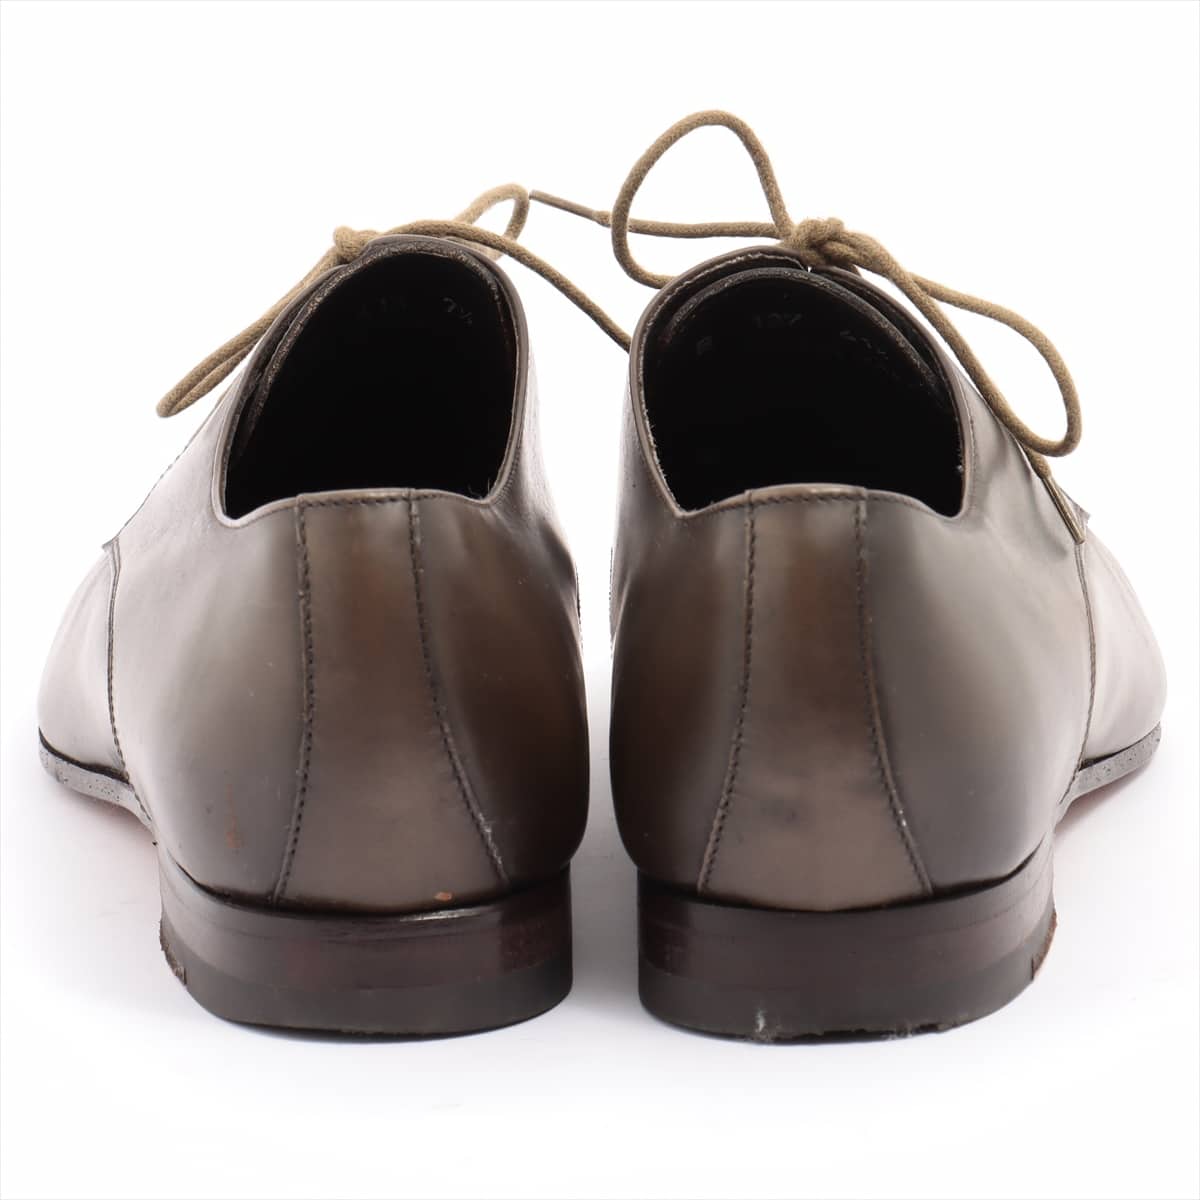 Paul Smith Leather Leather shoes 41.5 Men's Brown